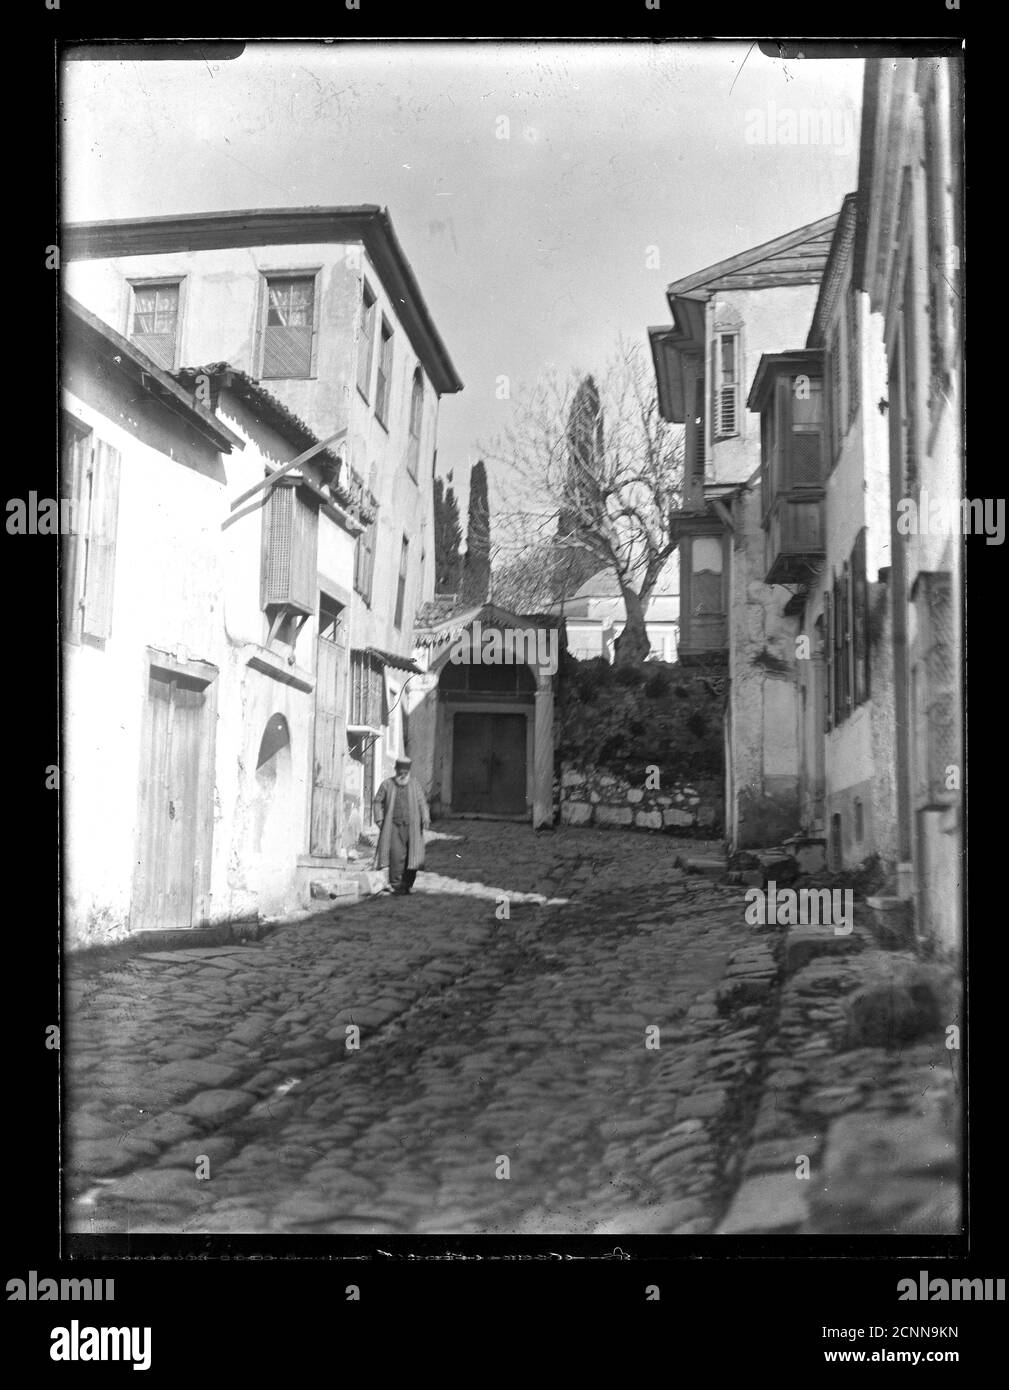 Turkey Izmir Manisa small town cobblestone alley, around 1910 in wintertime. Photograph on dry glass plate from the Herry W. Schaefer collection. Stock Photo